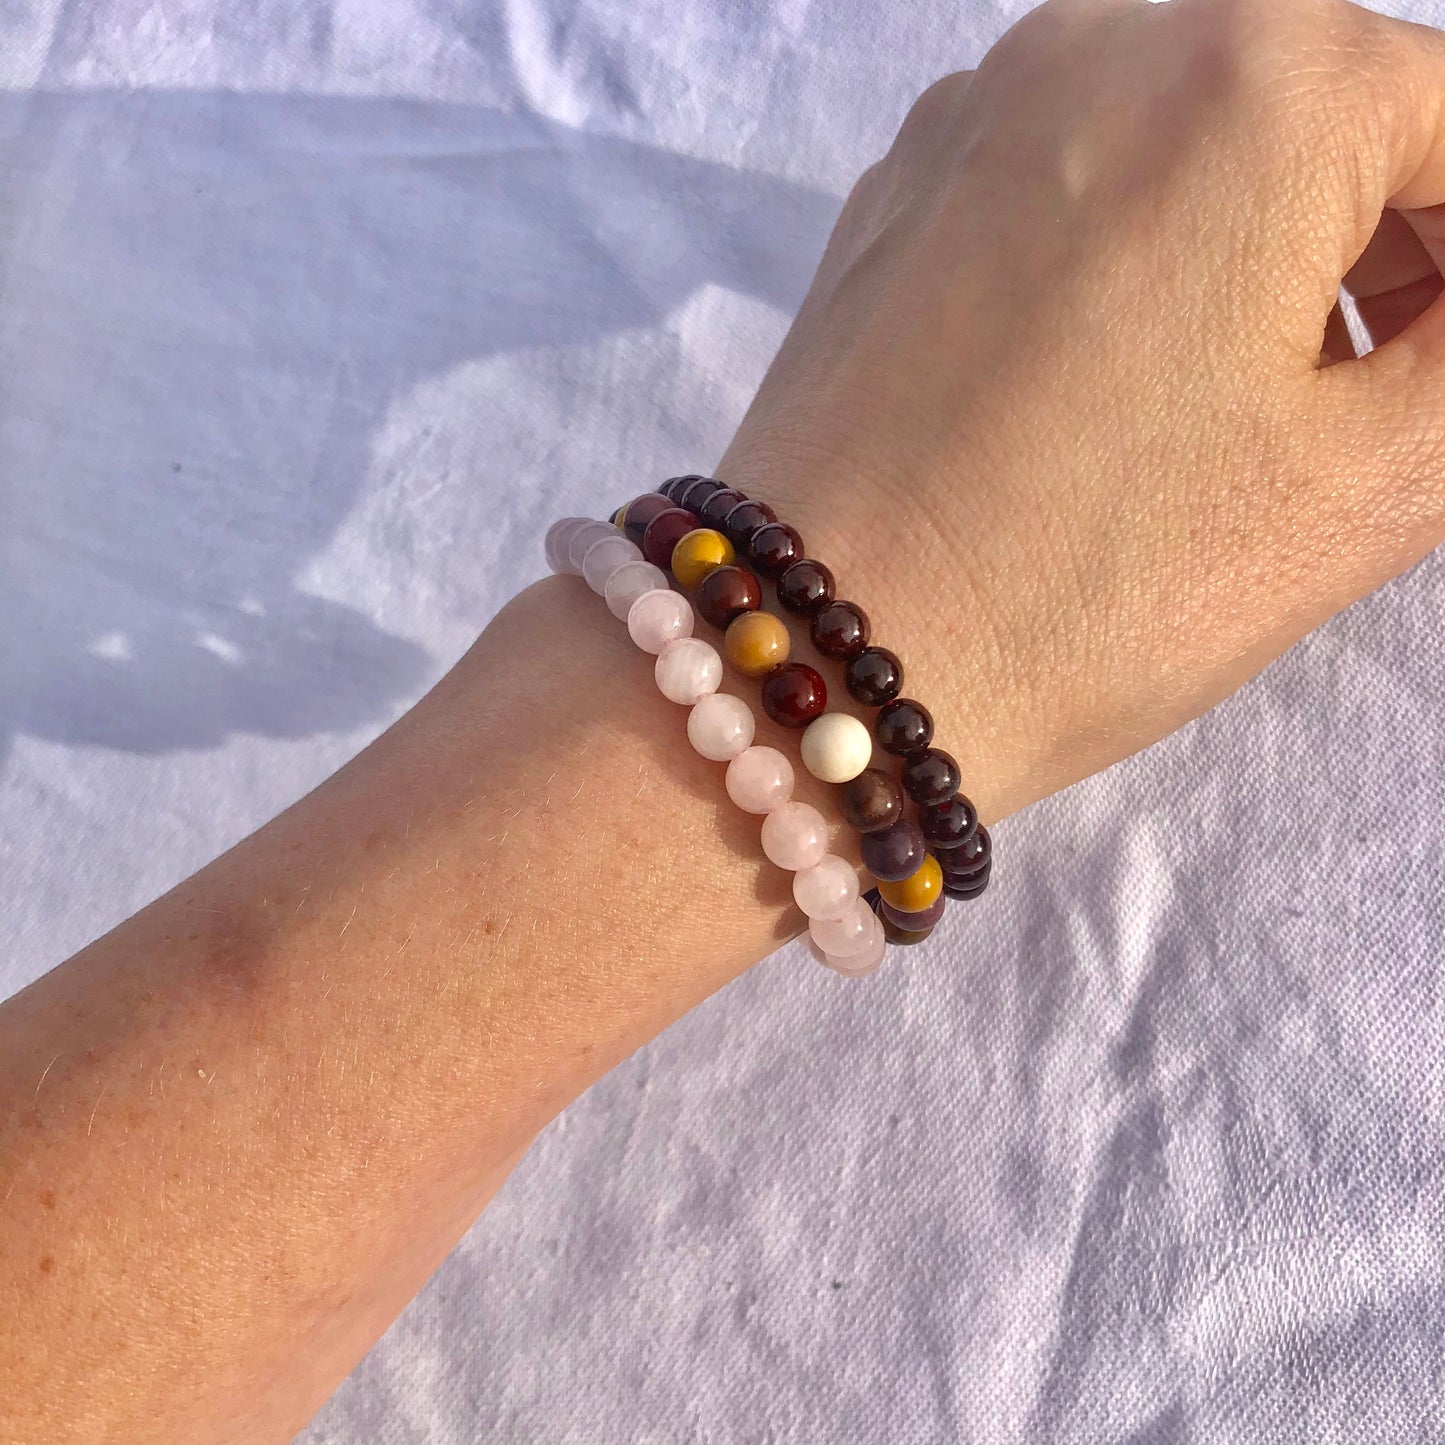 pink rose quartz, dark red garnet and yellow and red Mookaite crystal bead bracelets worn together